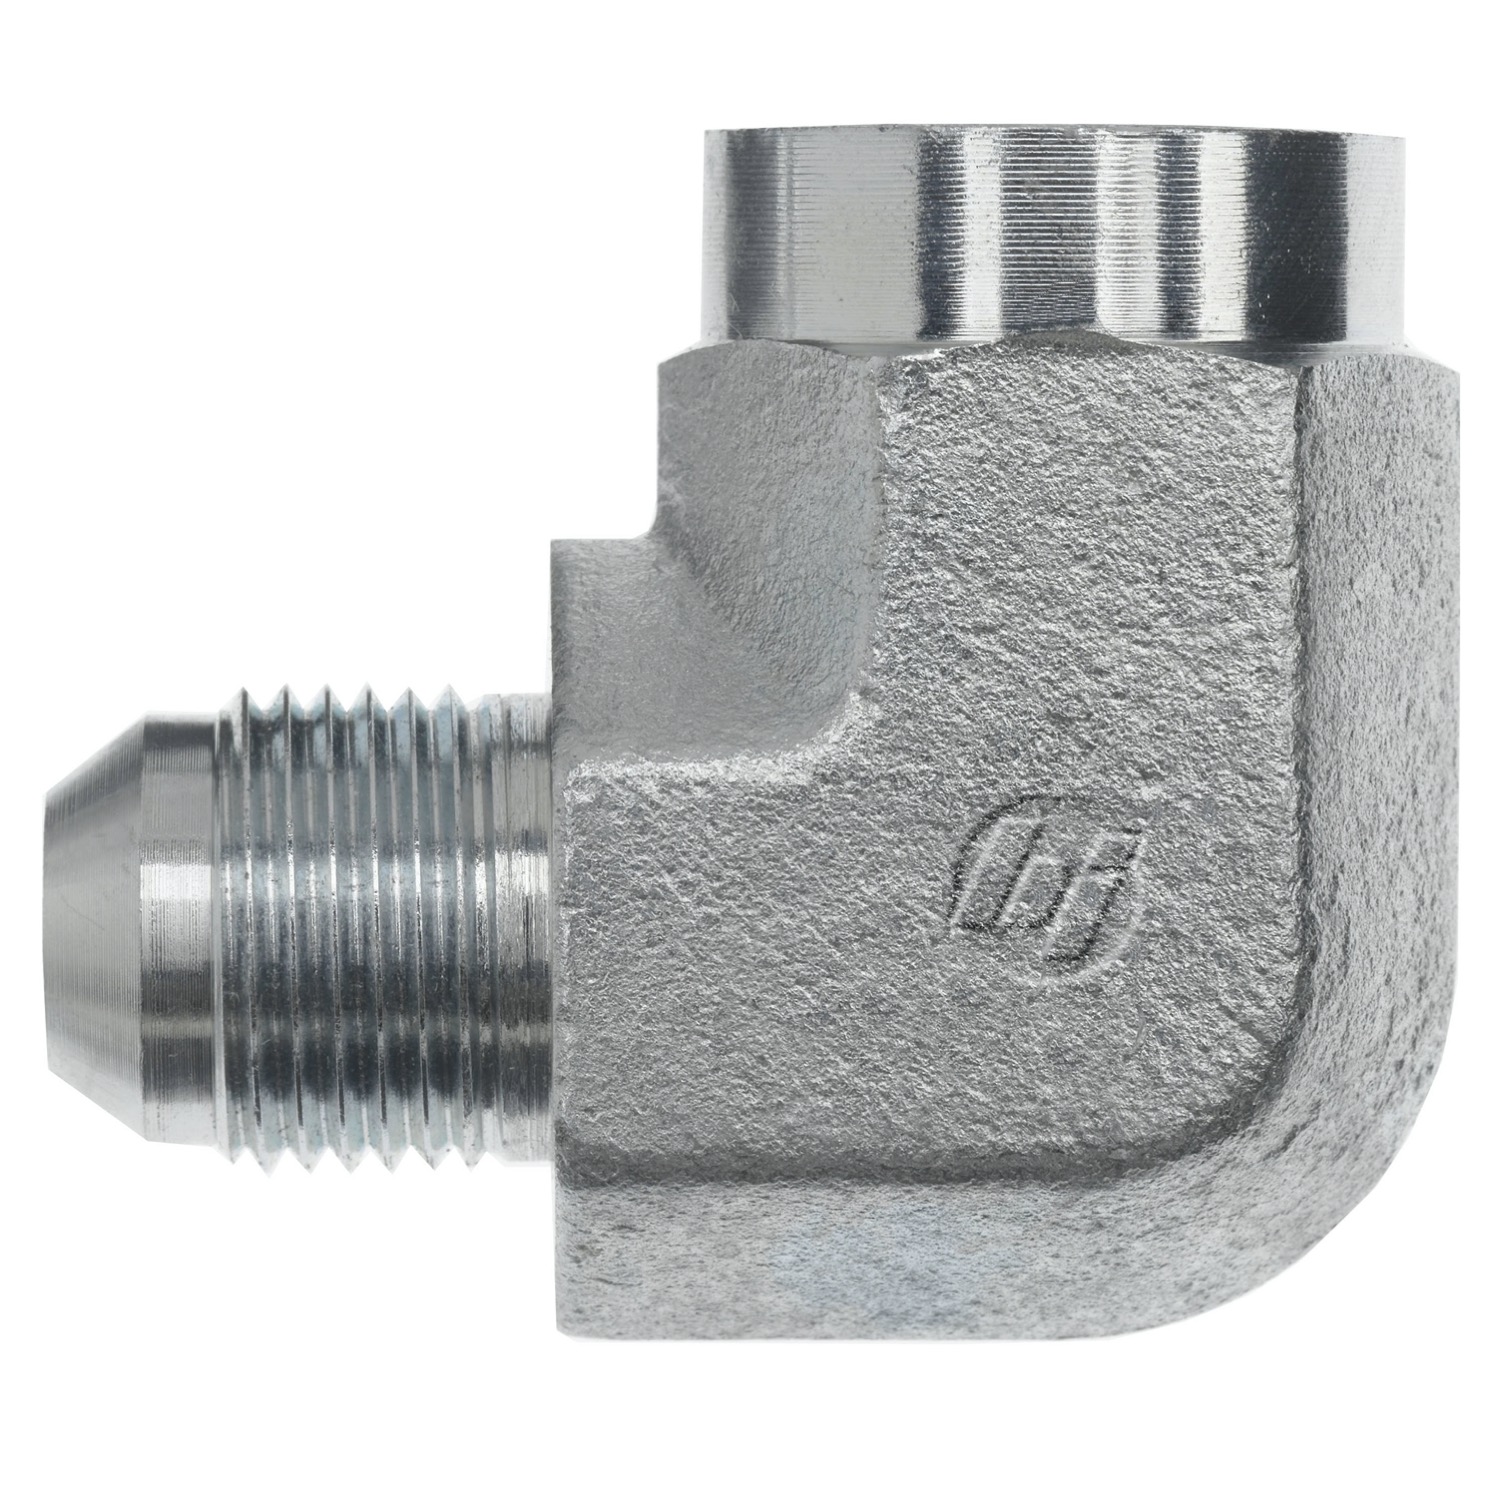 Hydraulic Hose Adapters - Elbow 90° Fitting, JIC 37° Flare to NPTF- 2502 Series 2502-32-32-FG